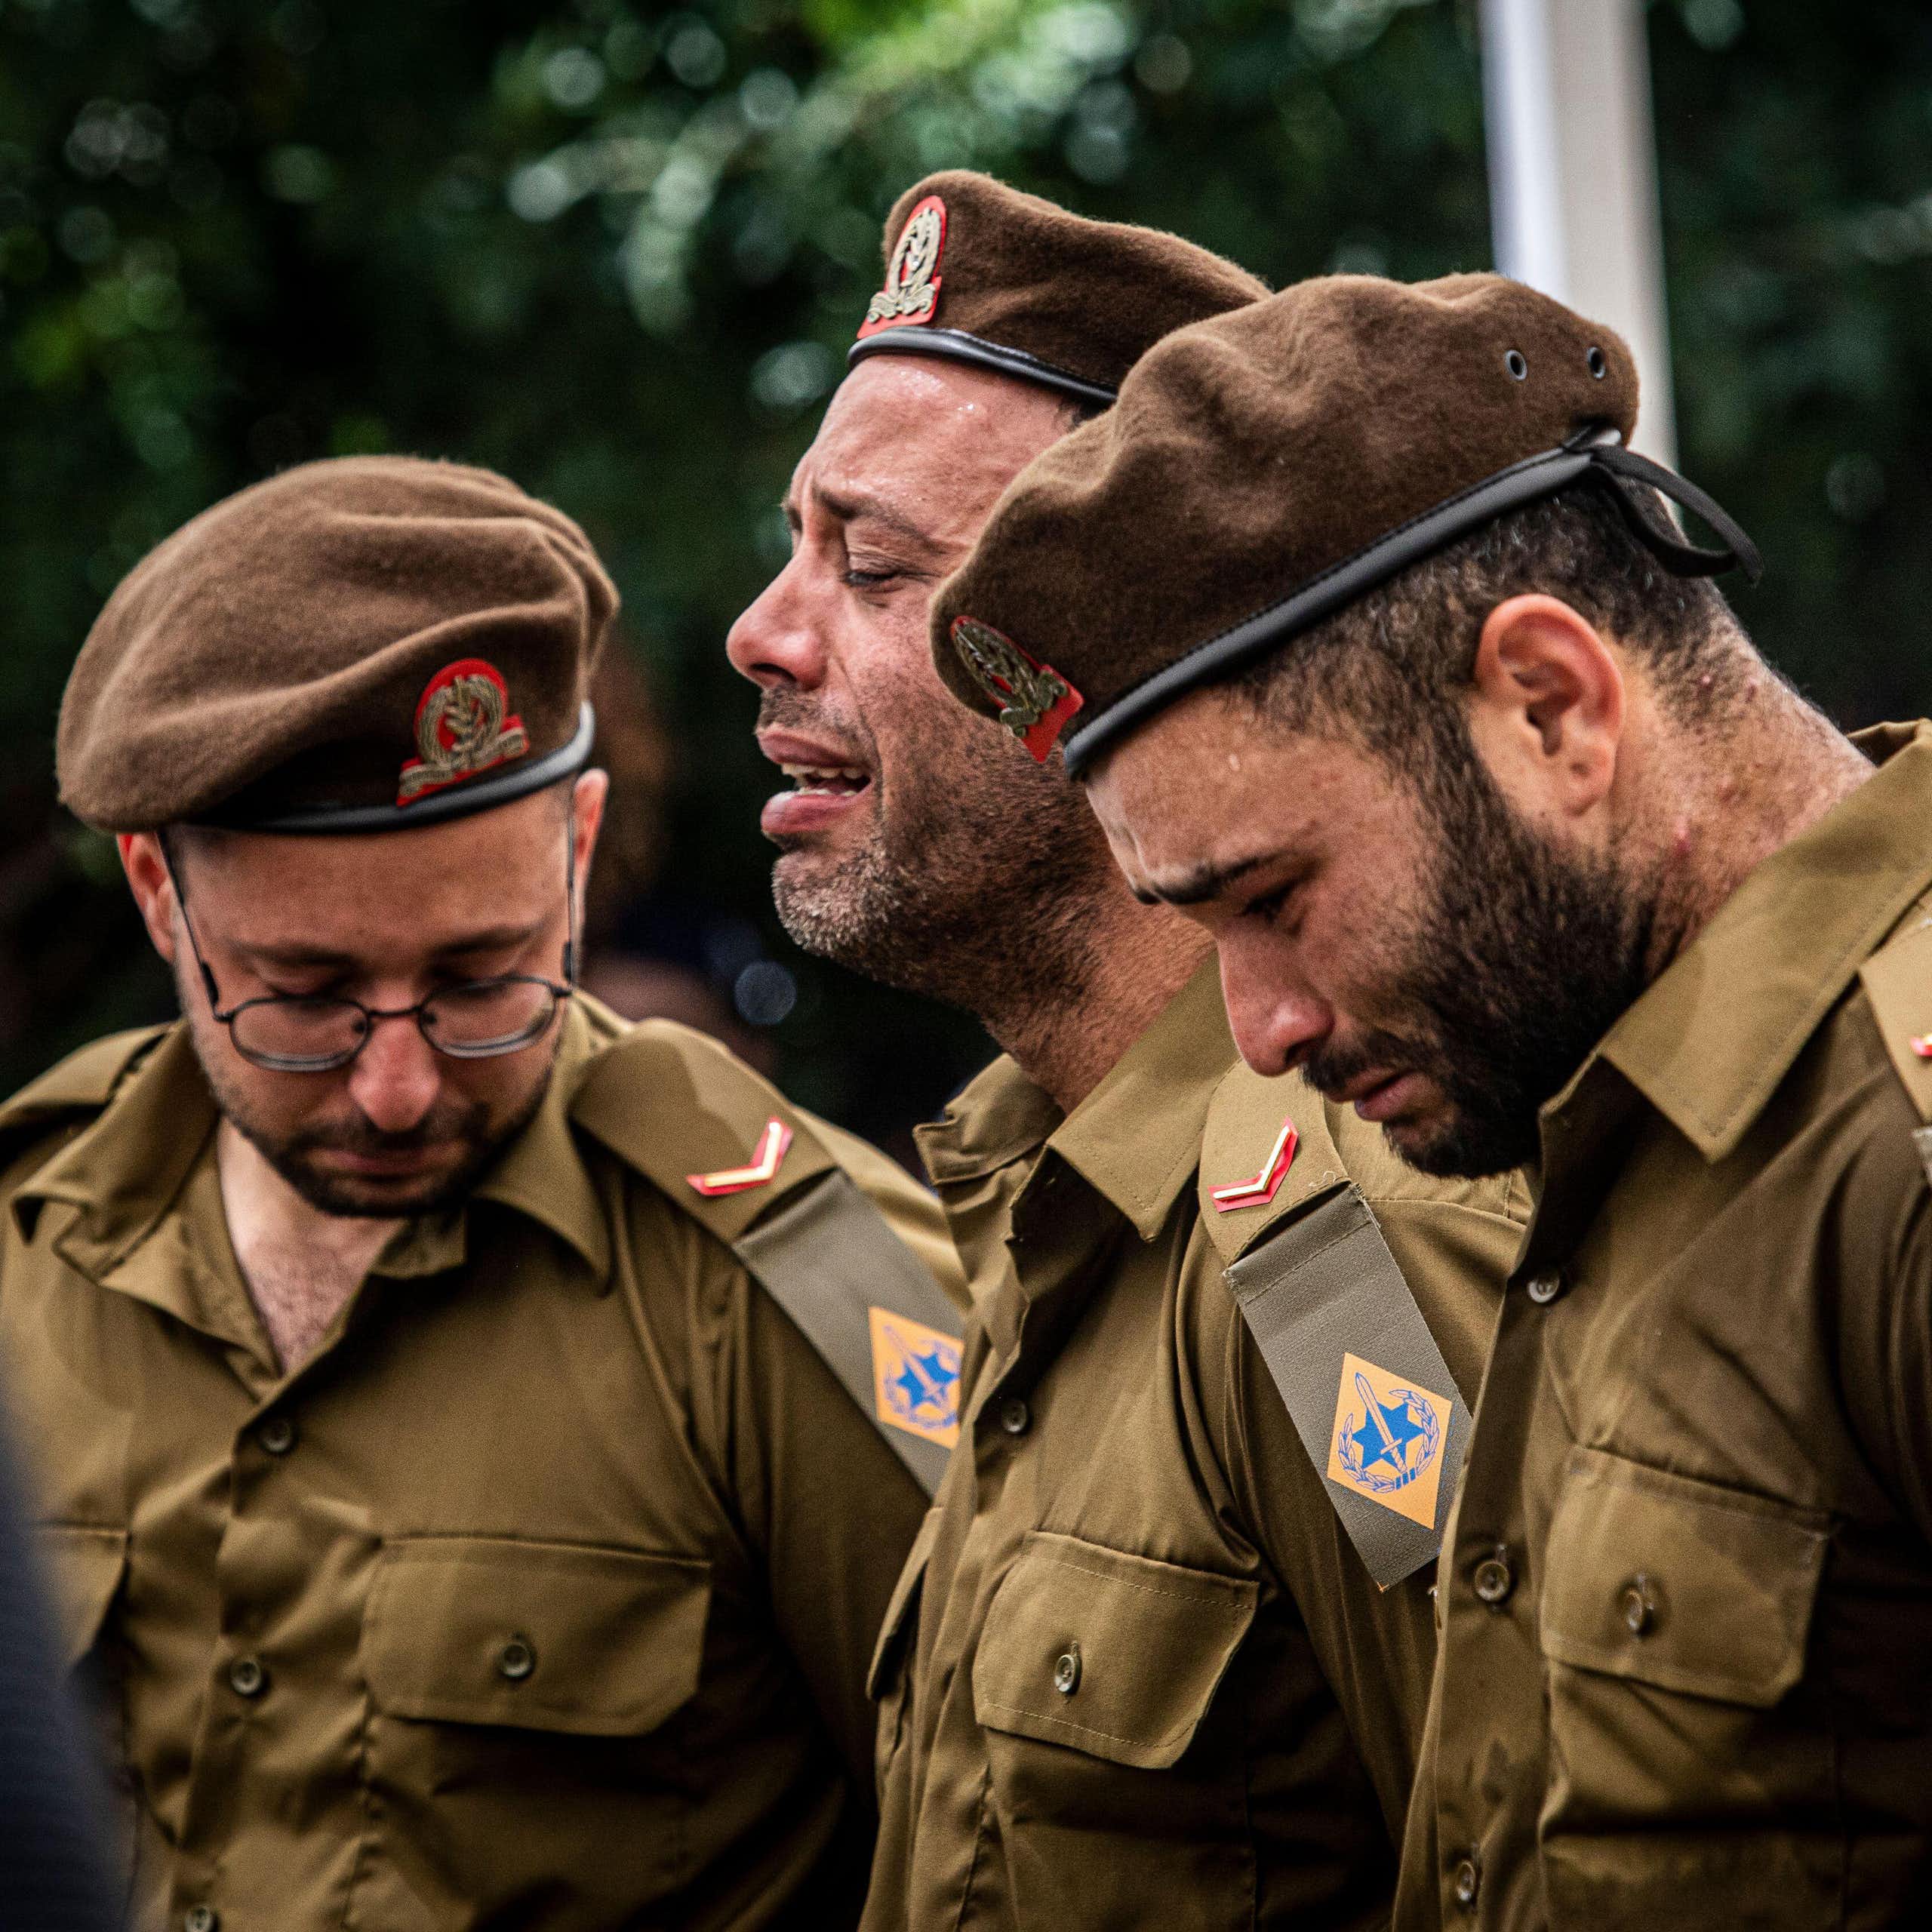 Members of the Israel Defense Forces weep at the funeral of a comrade.